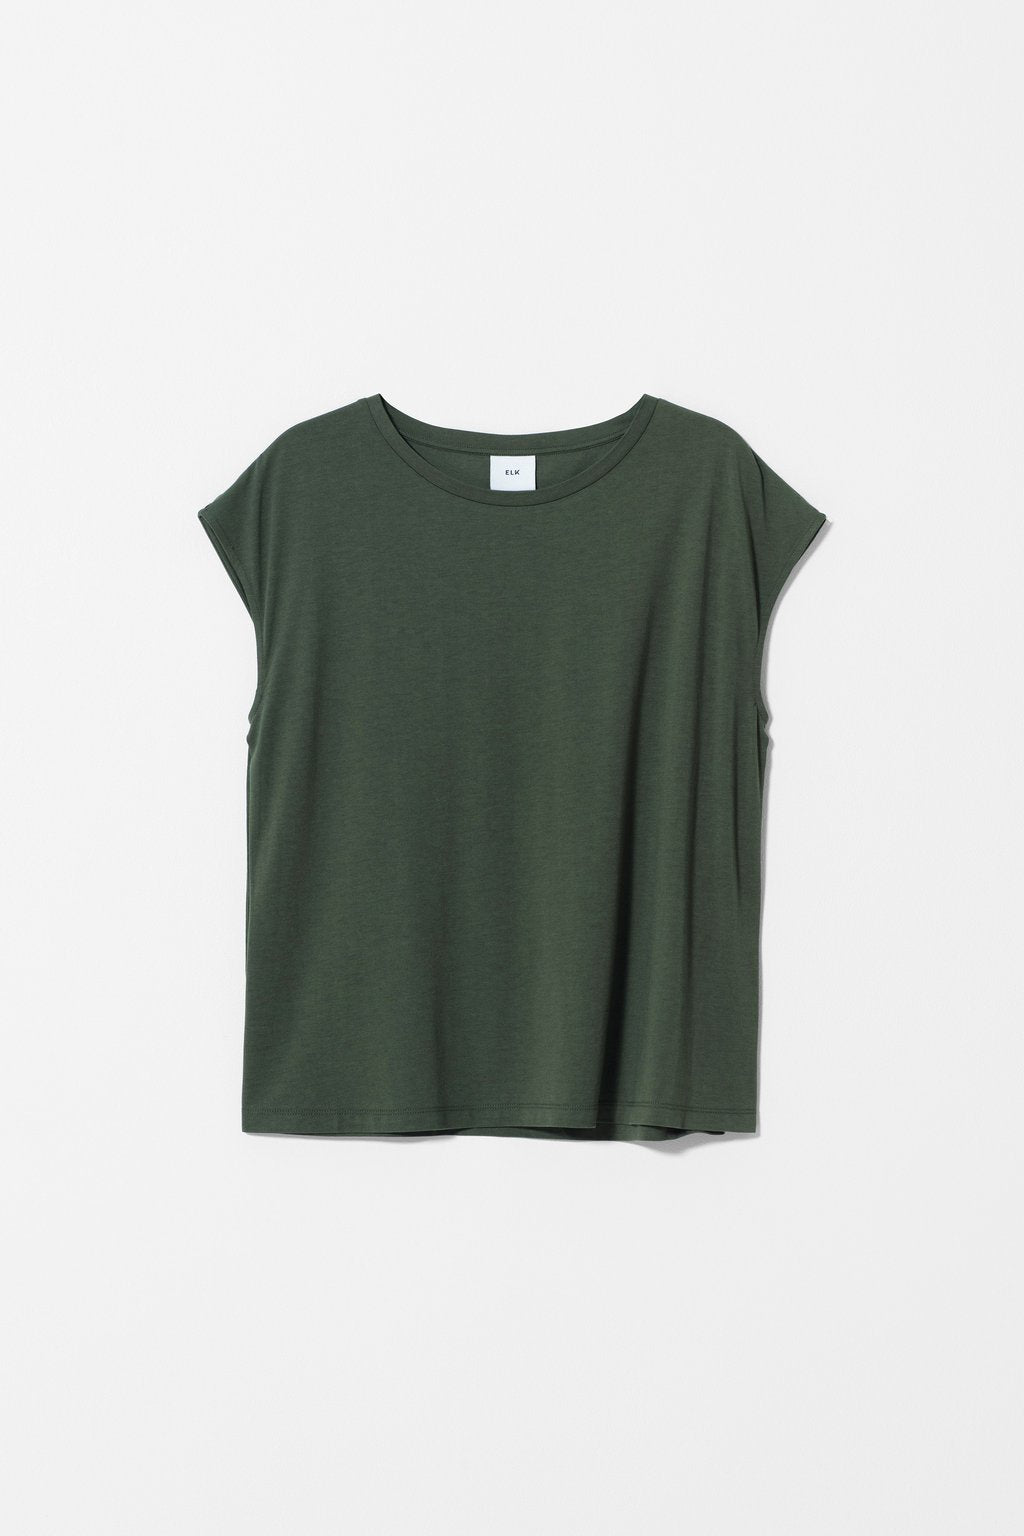 Tee Oue Olive